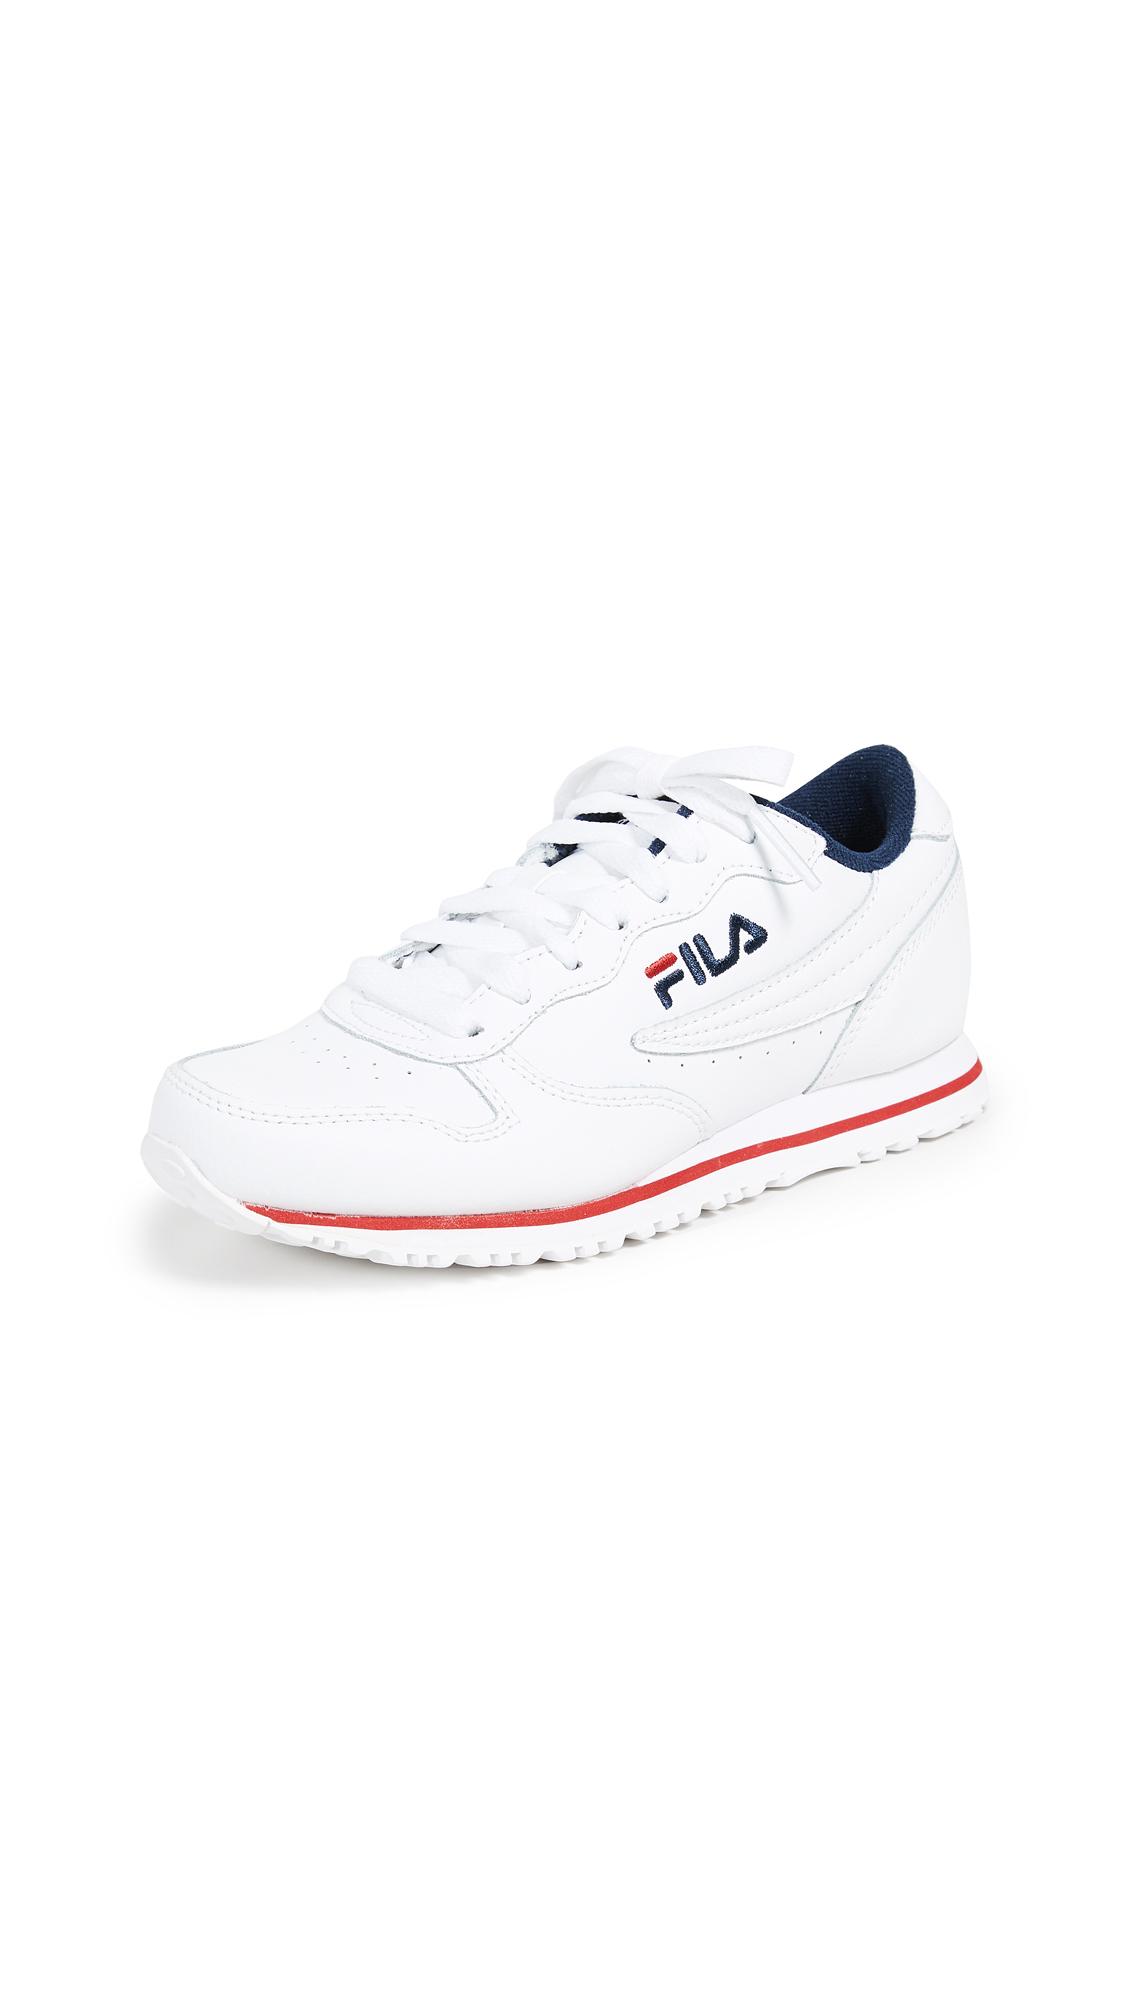 Fila Euro Norway, SAVE 46% - aveclumiere.com